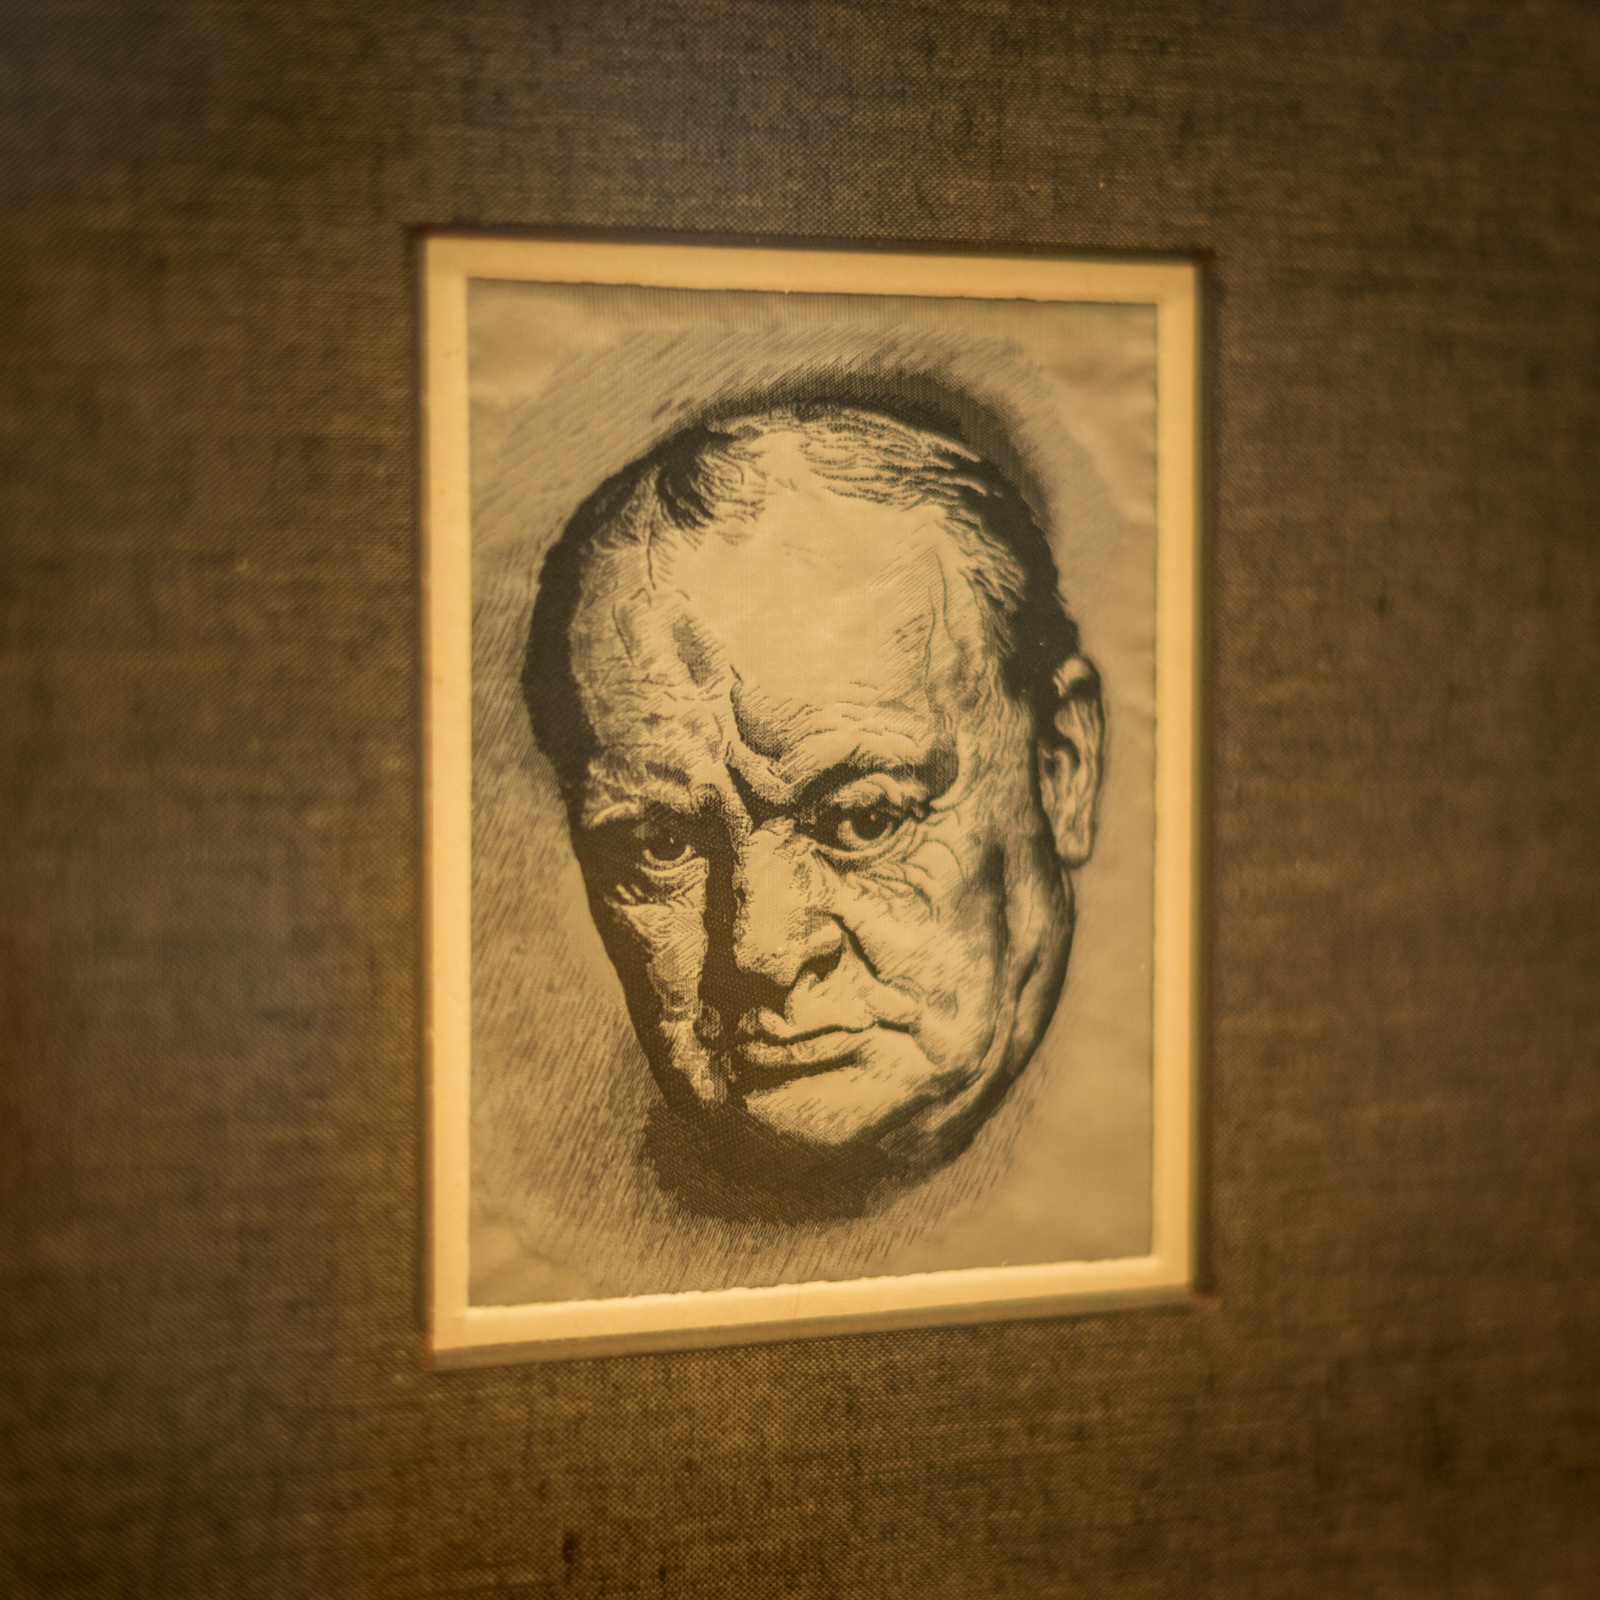 An etching if Winston Churchill on display in the ‘Surrey Stories Gallery’